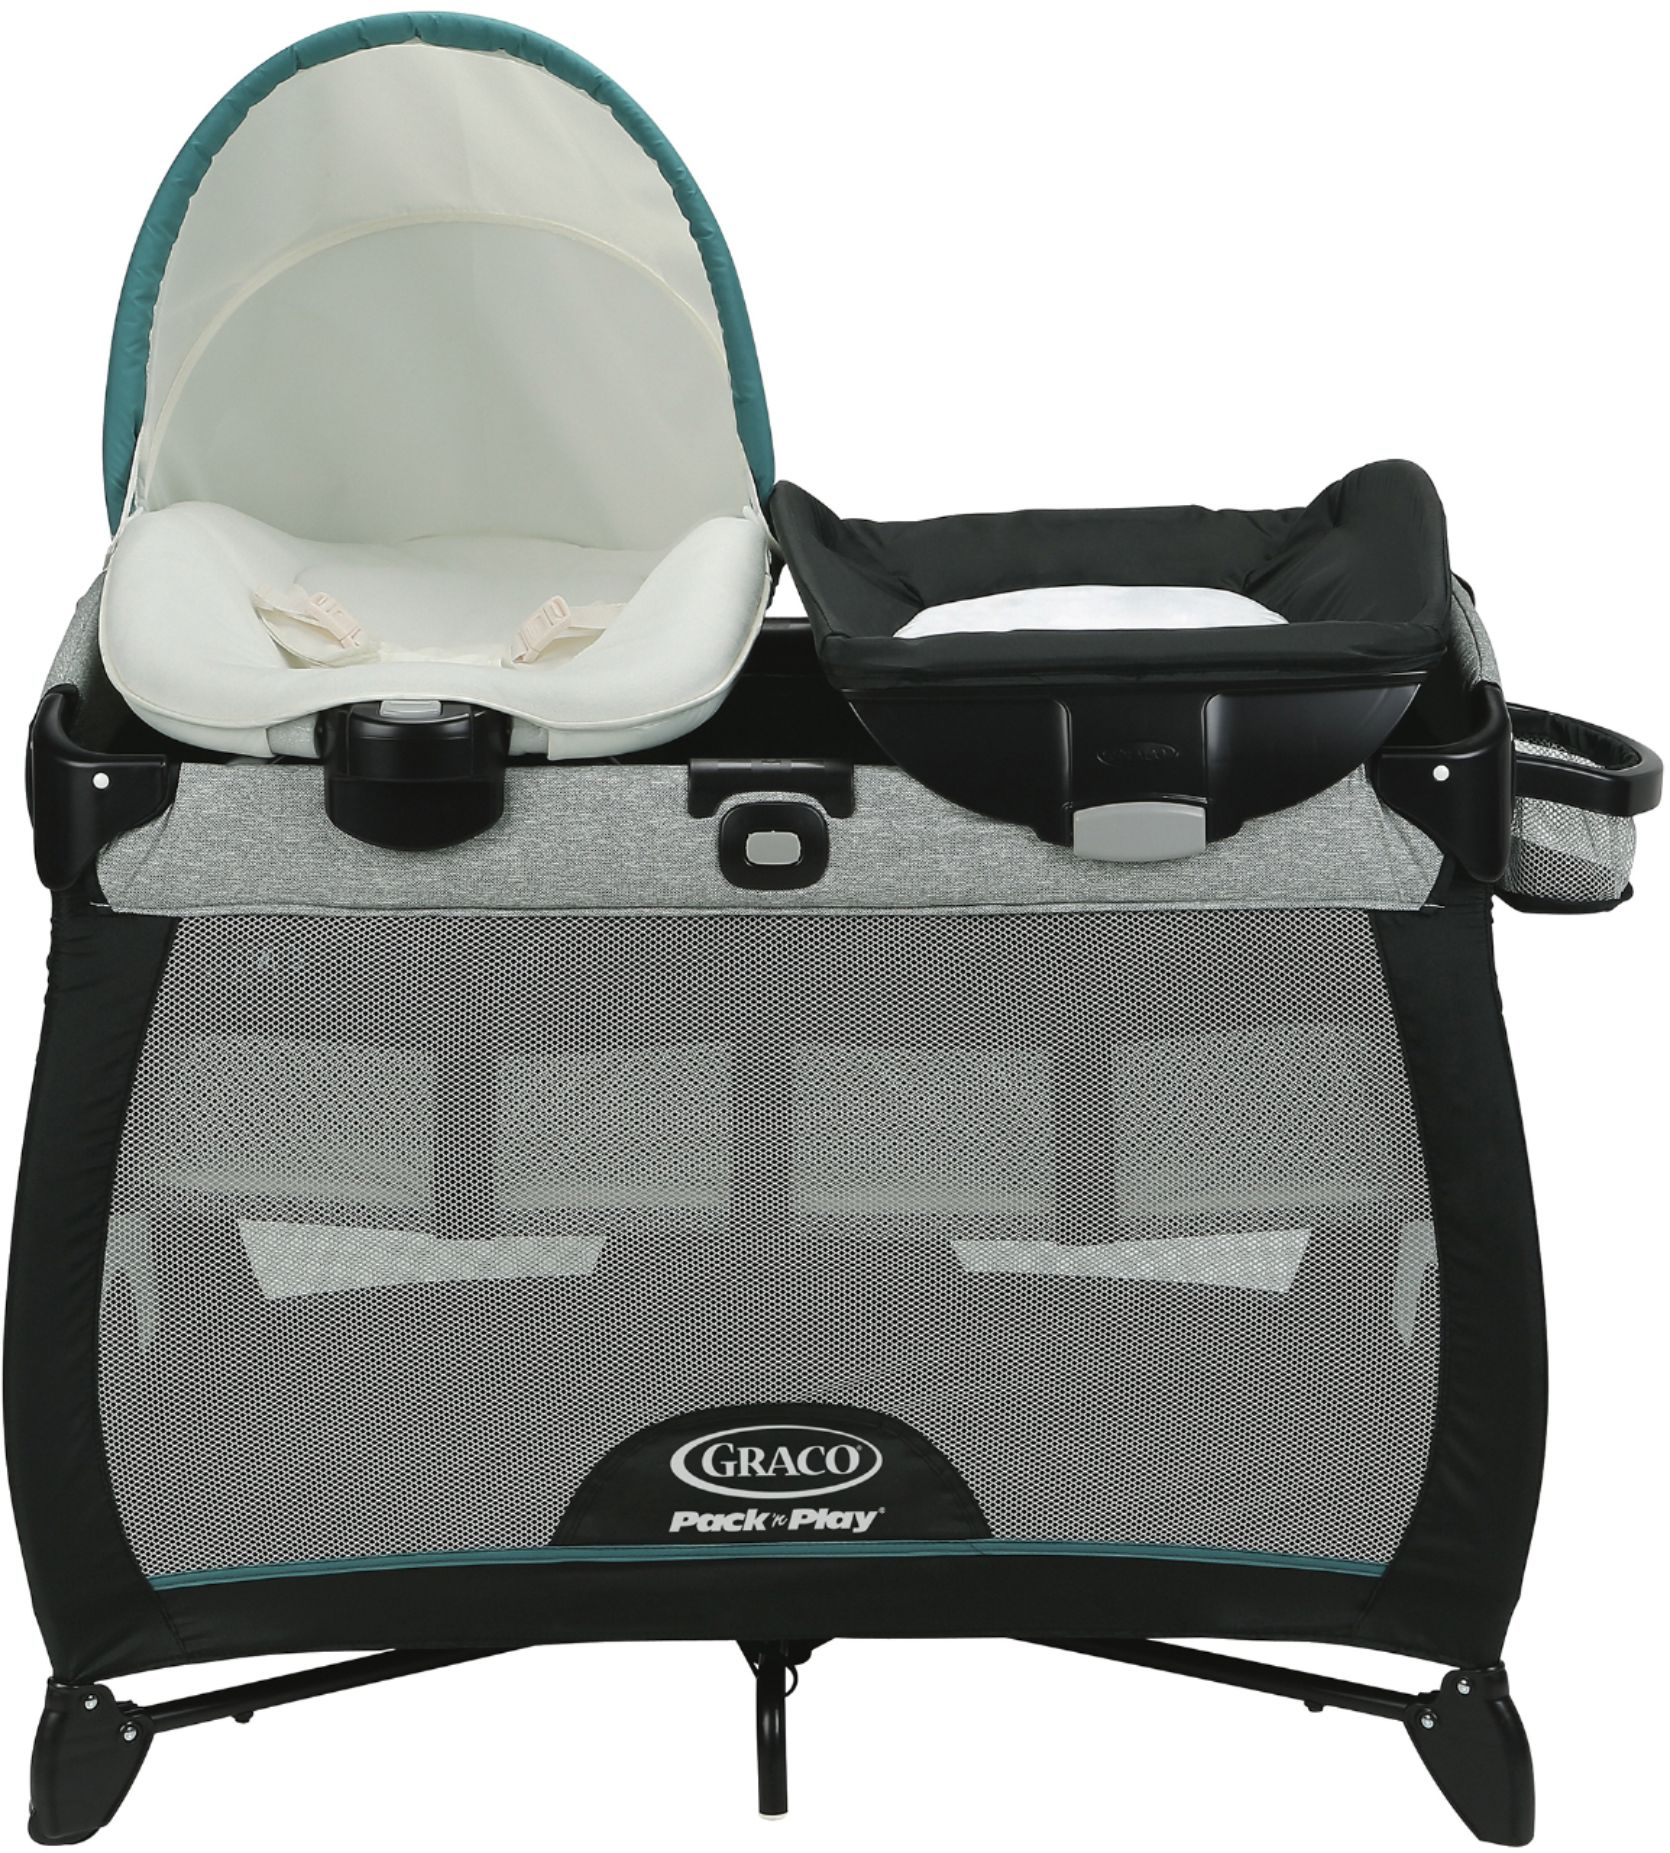 Graco - Pack 'n Play Quick Connect Portable Napper Playard - Darcie